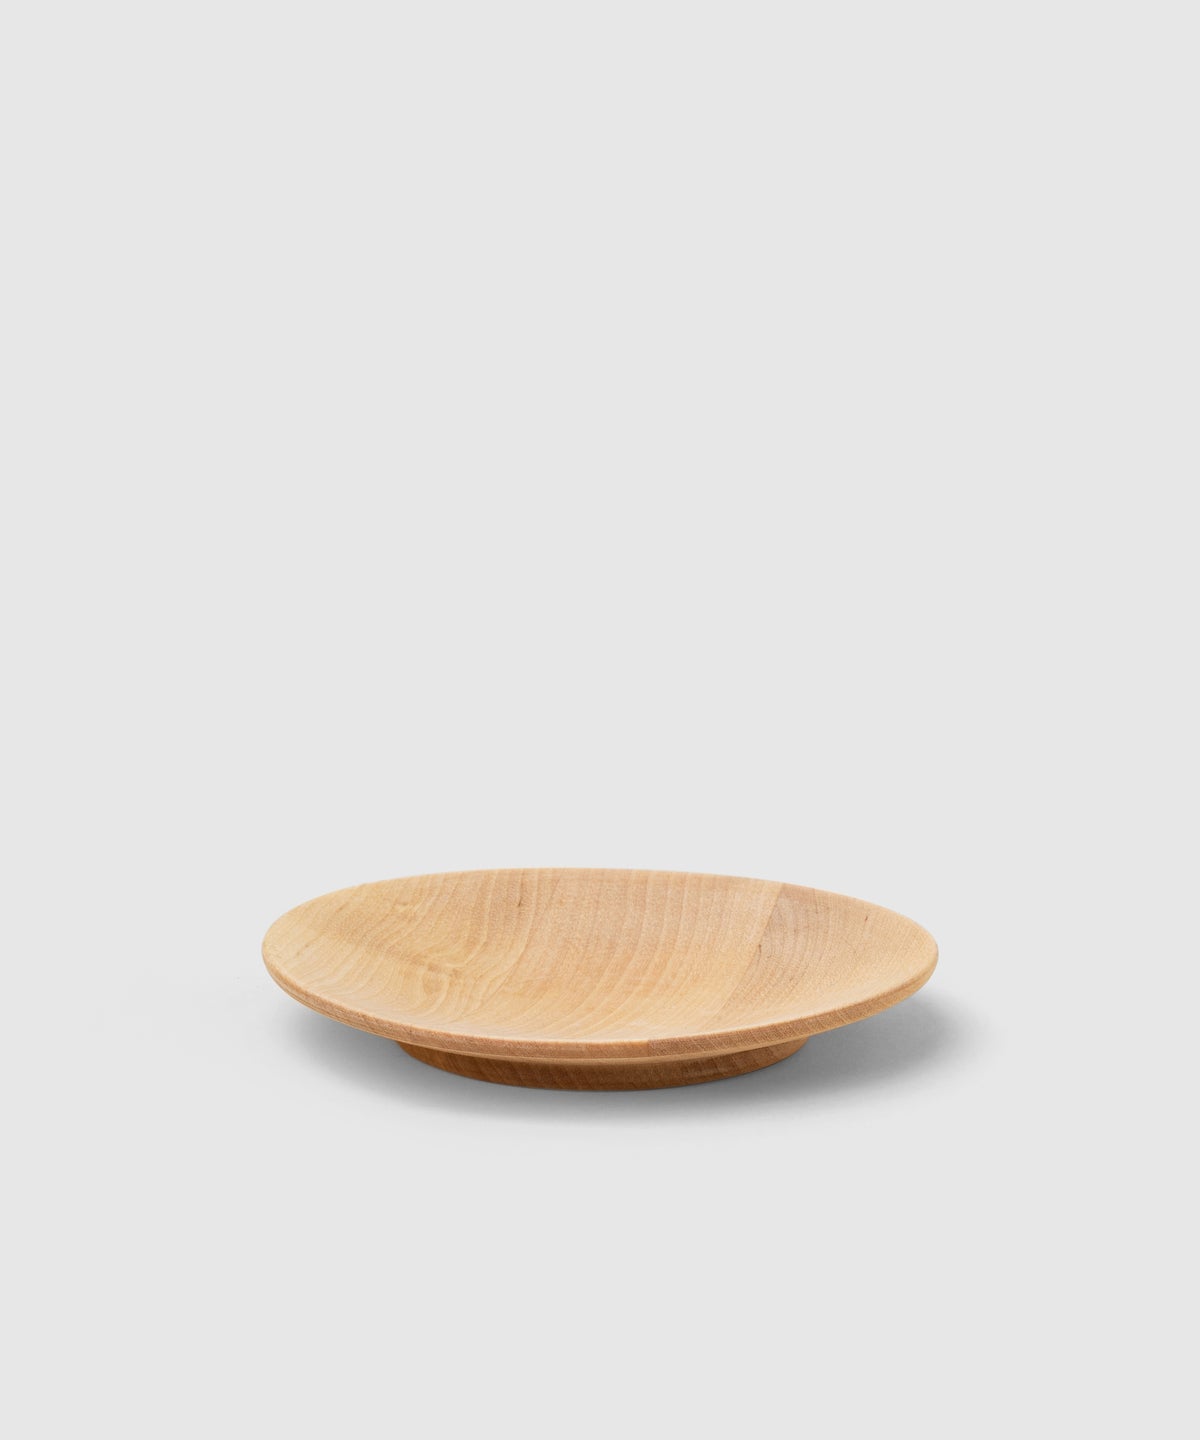 Large plate made of birch wood